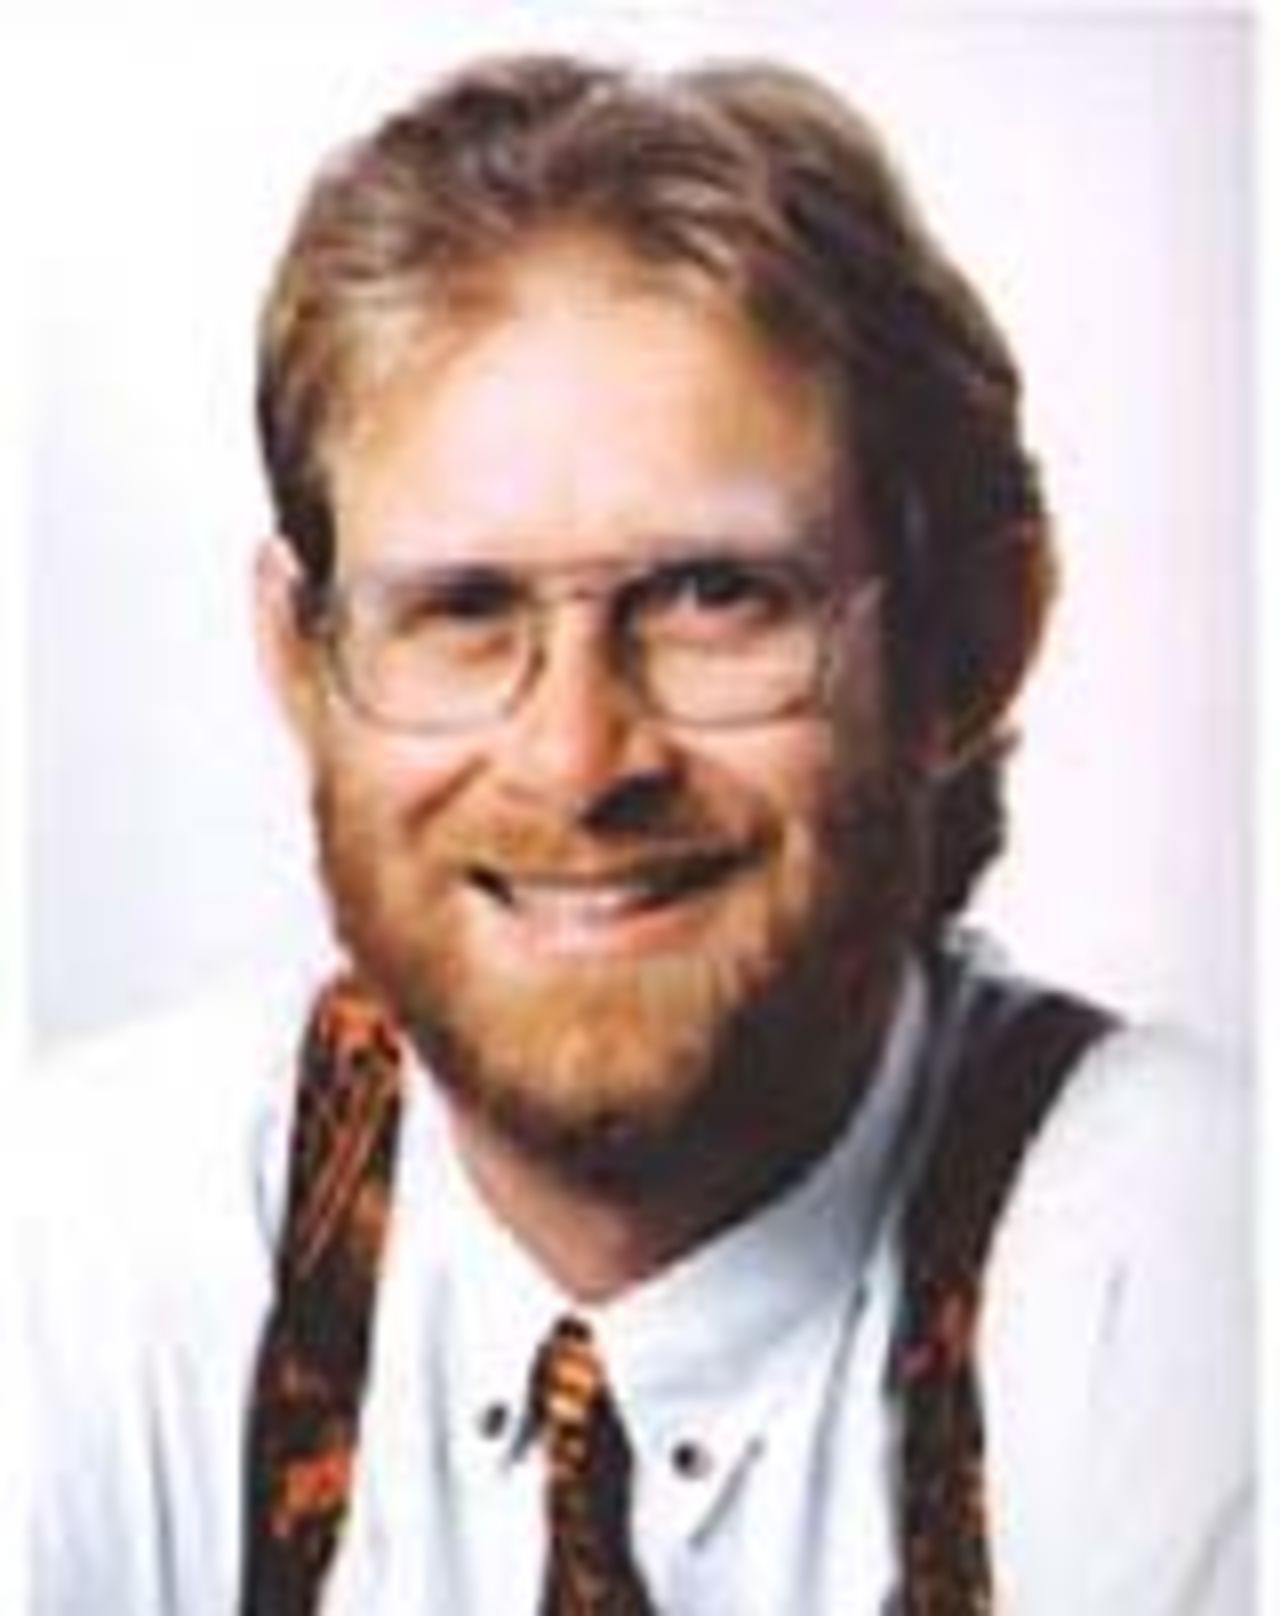 Rod Donald, co-leader of NZ's Green party